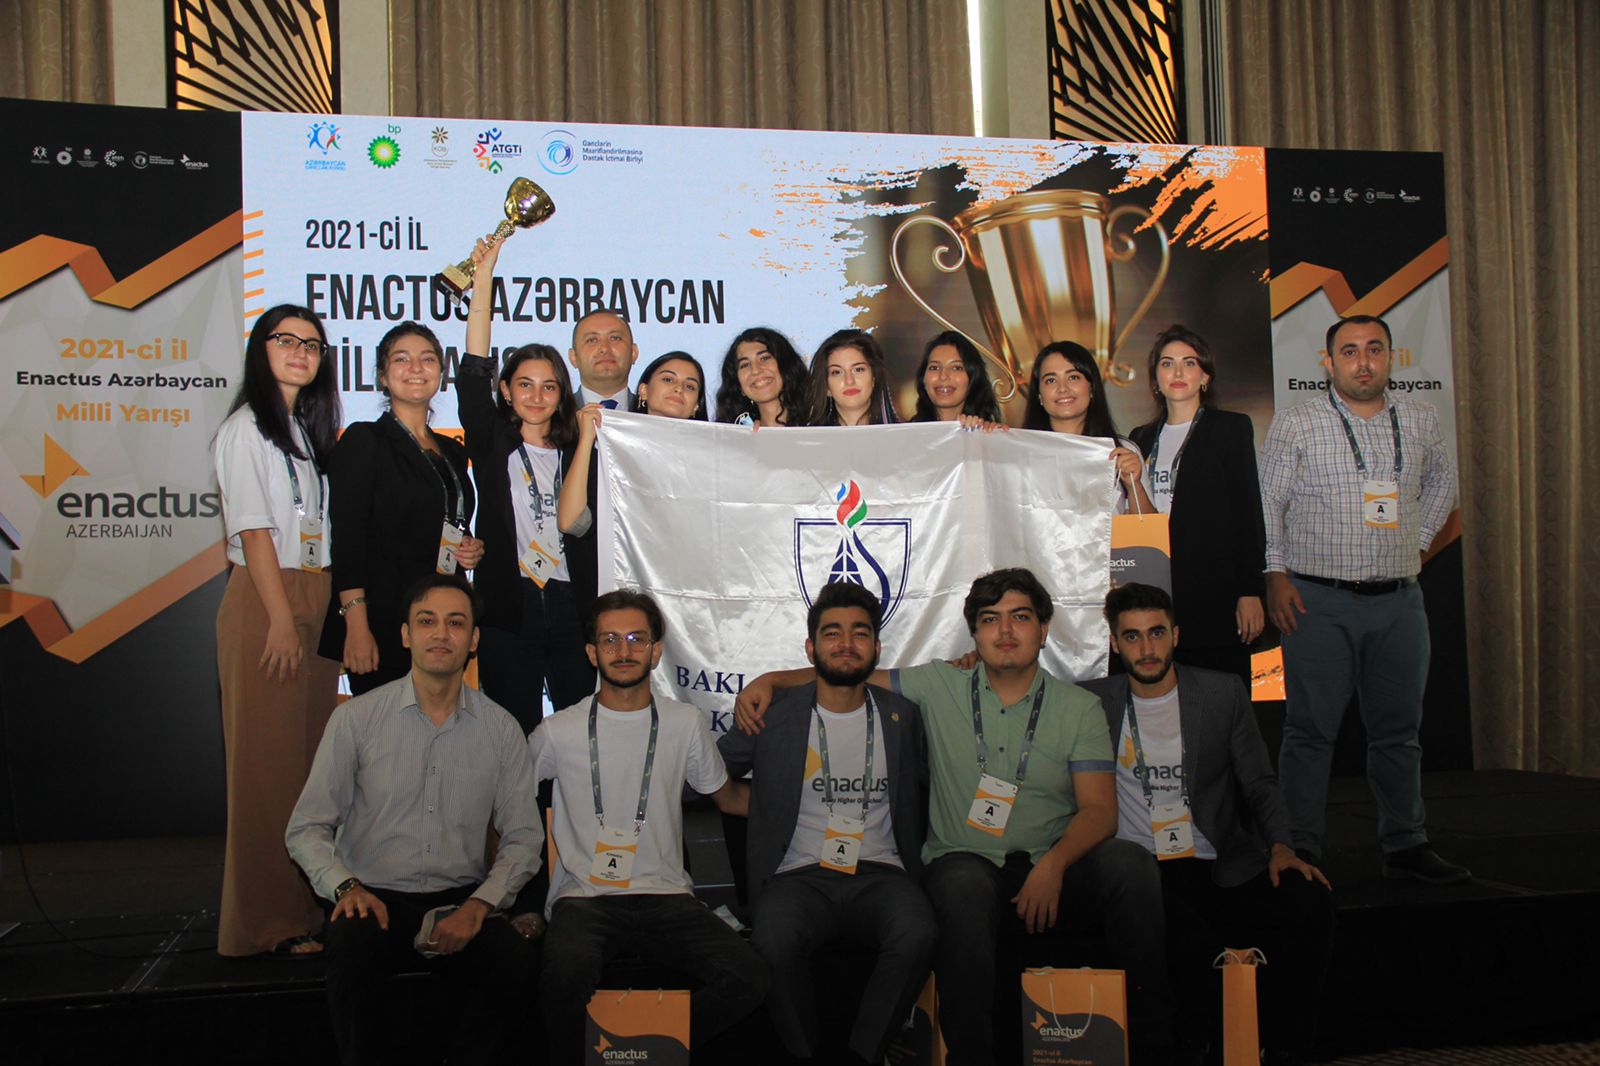 This team will represent Azerbaijan at the Enactus World Cup 